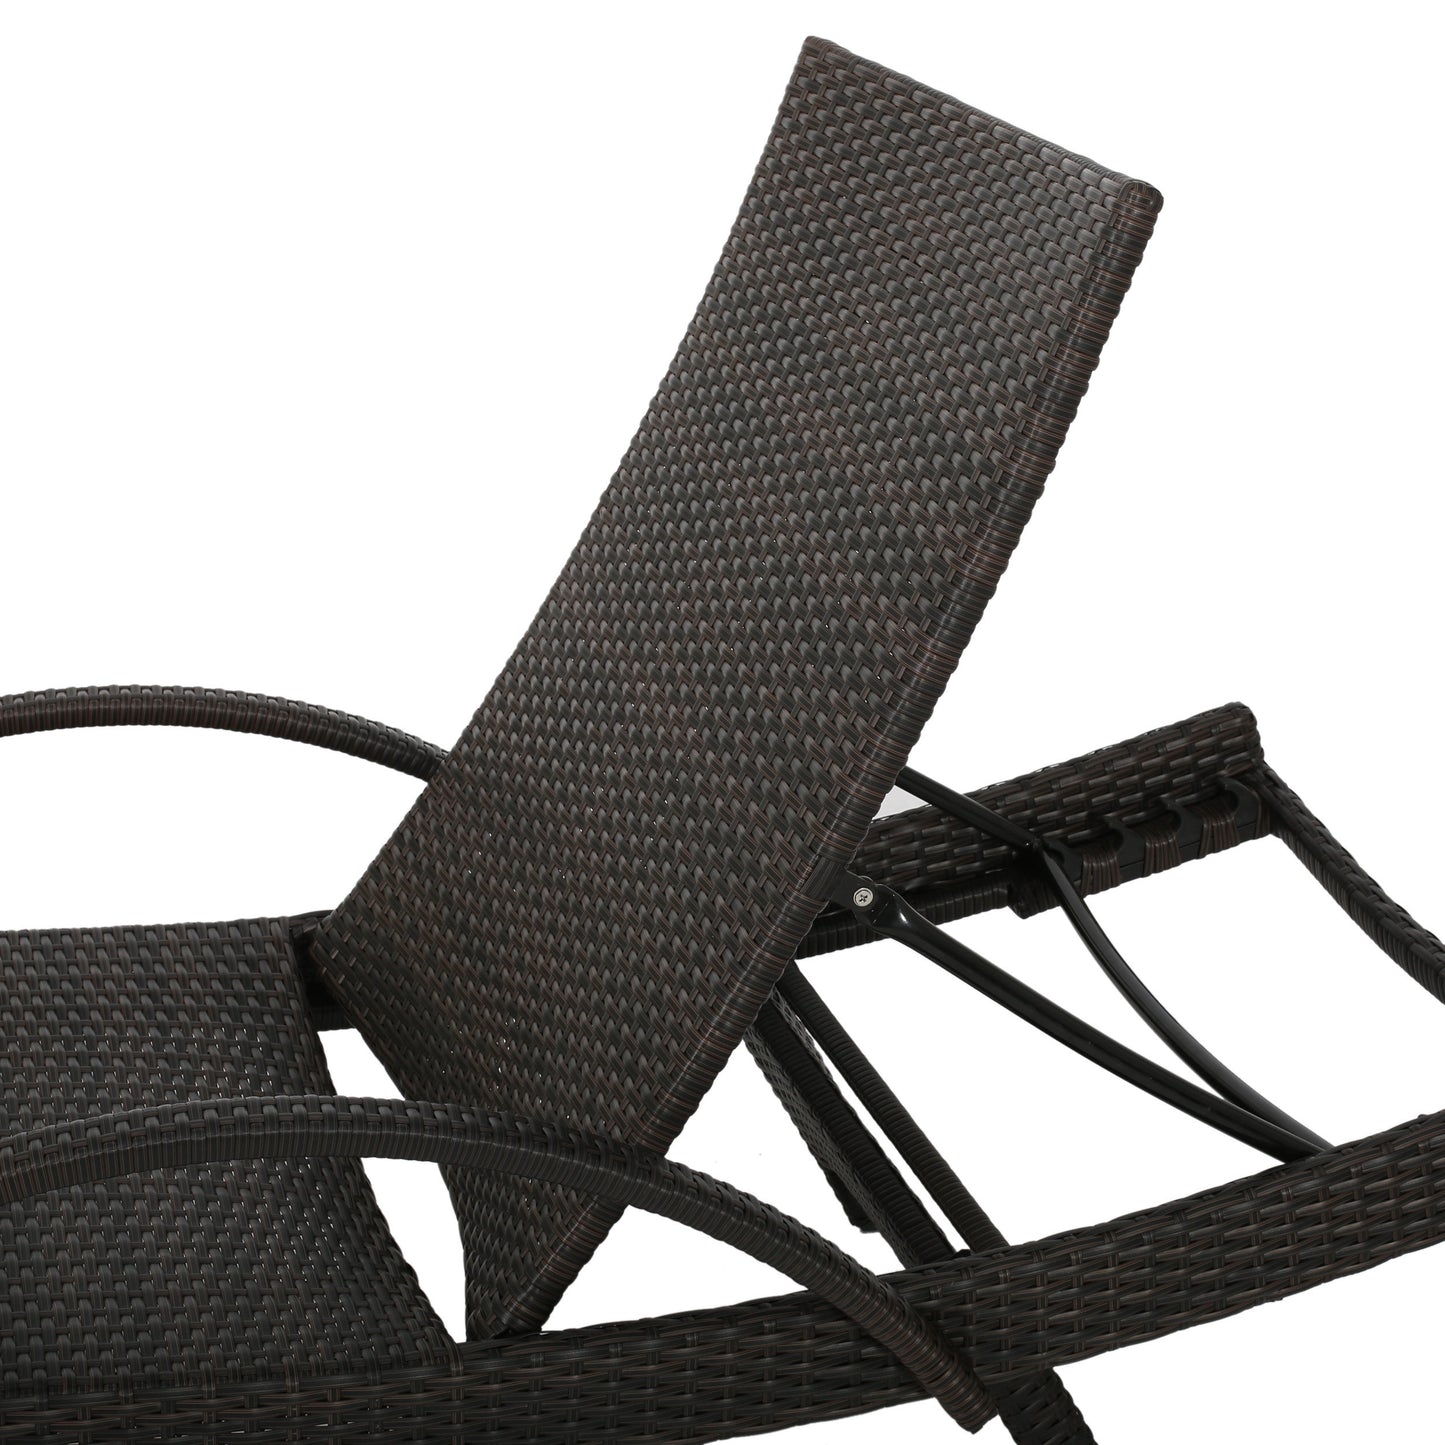 Savana Outdoor Wicker Lounge with Arms with Water Resistant Cushion